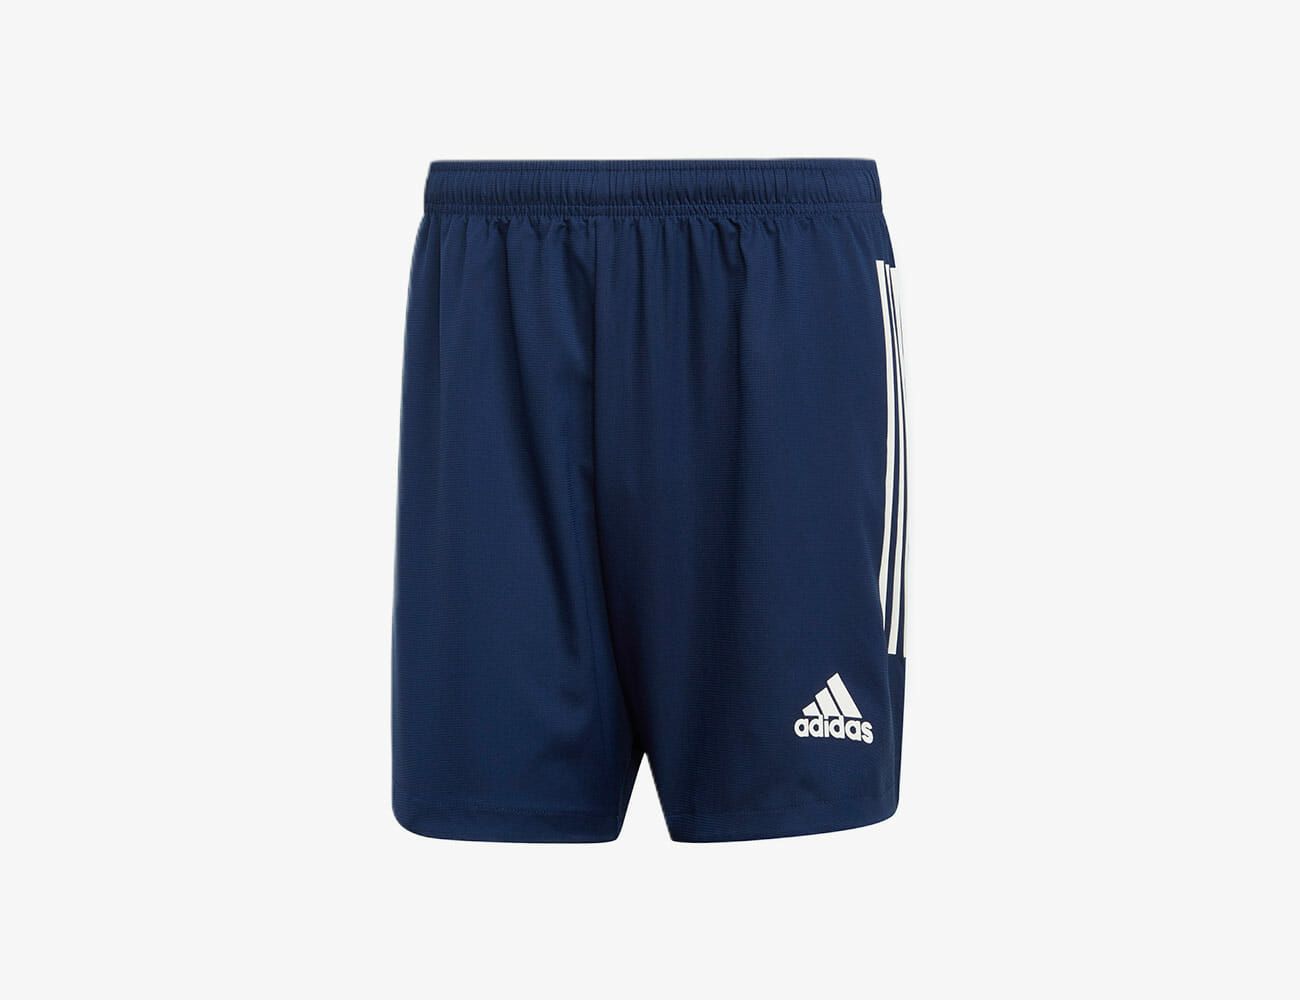 outfits with adidas shorts